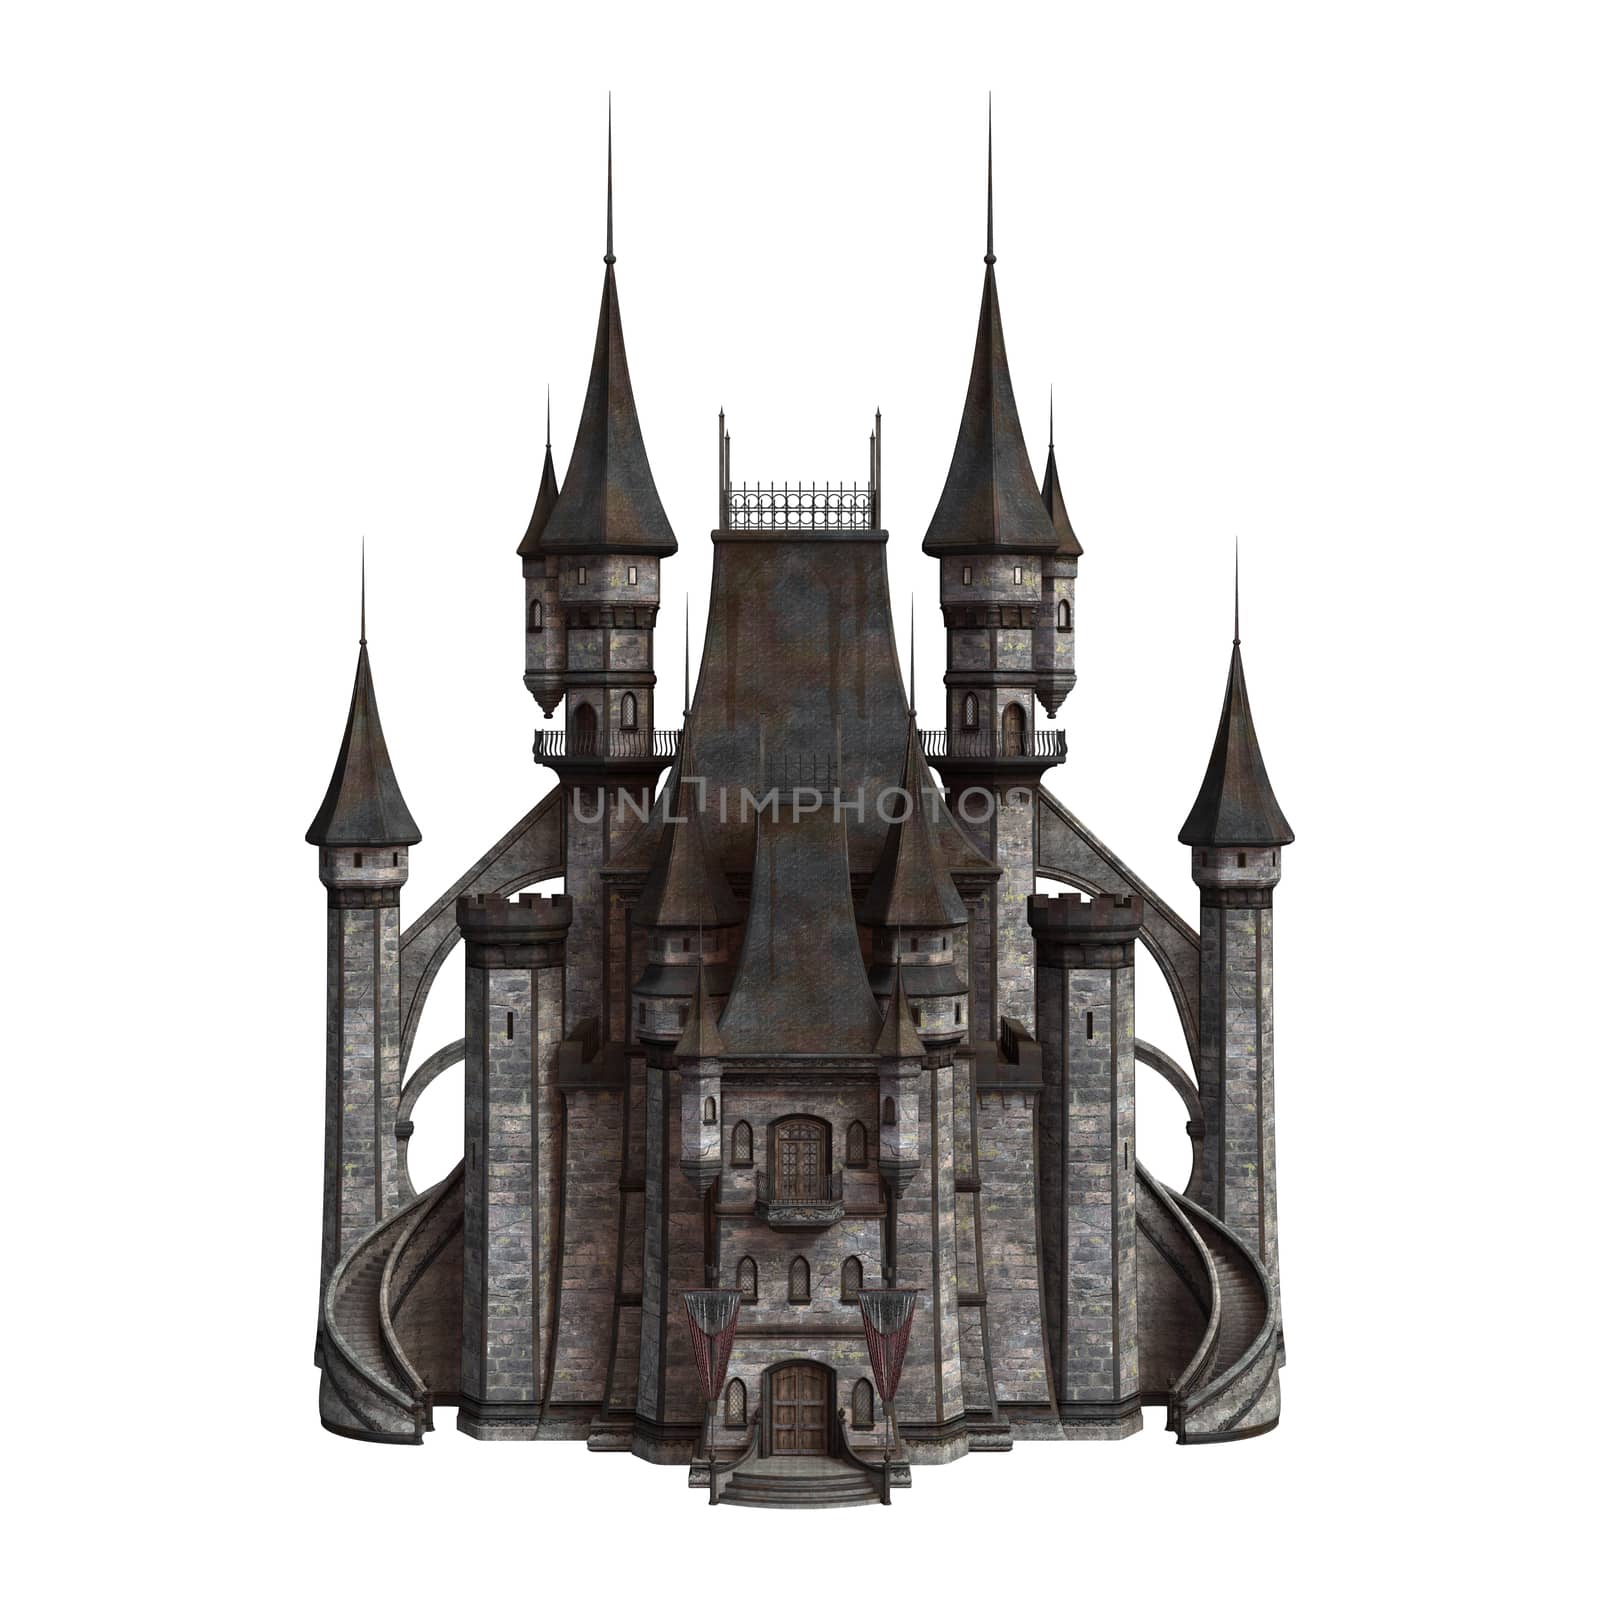 3D digital render of an old fairytale castle isolated on white background